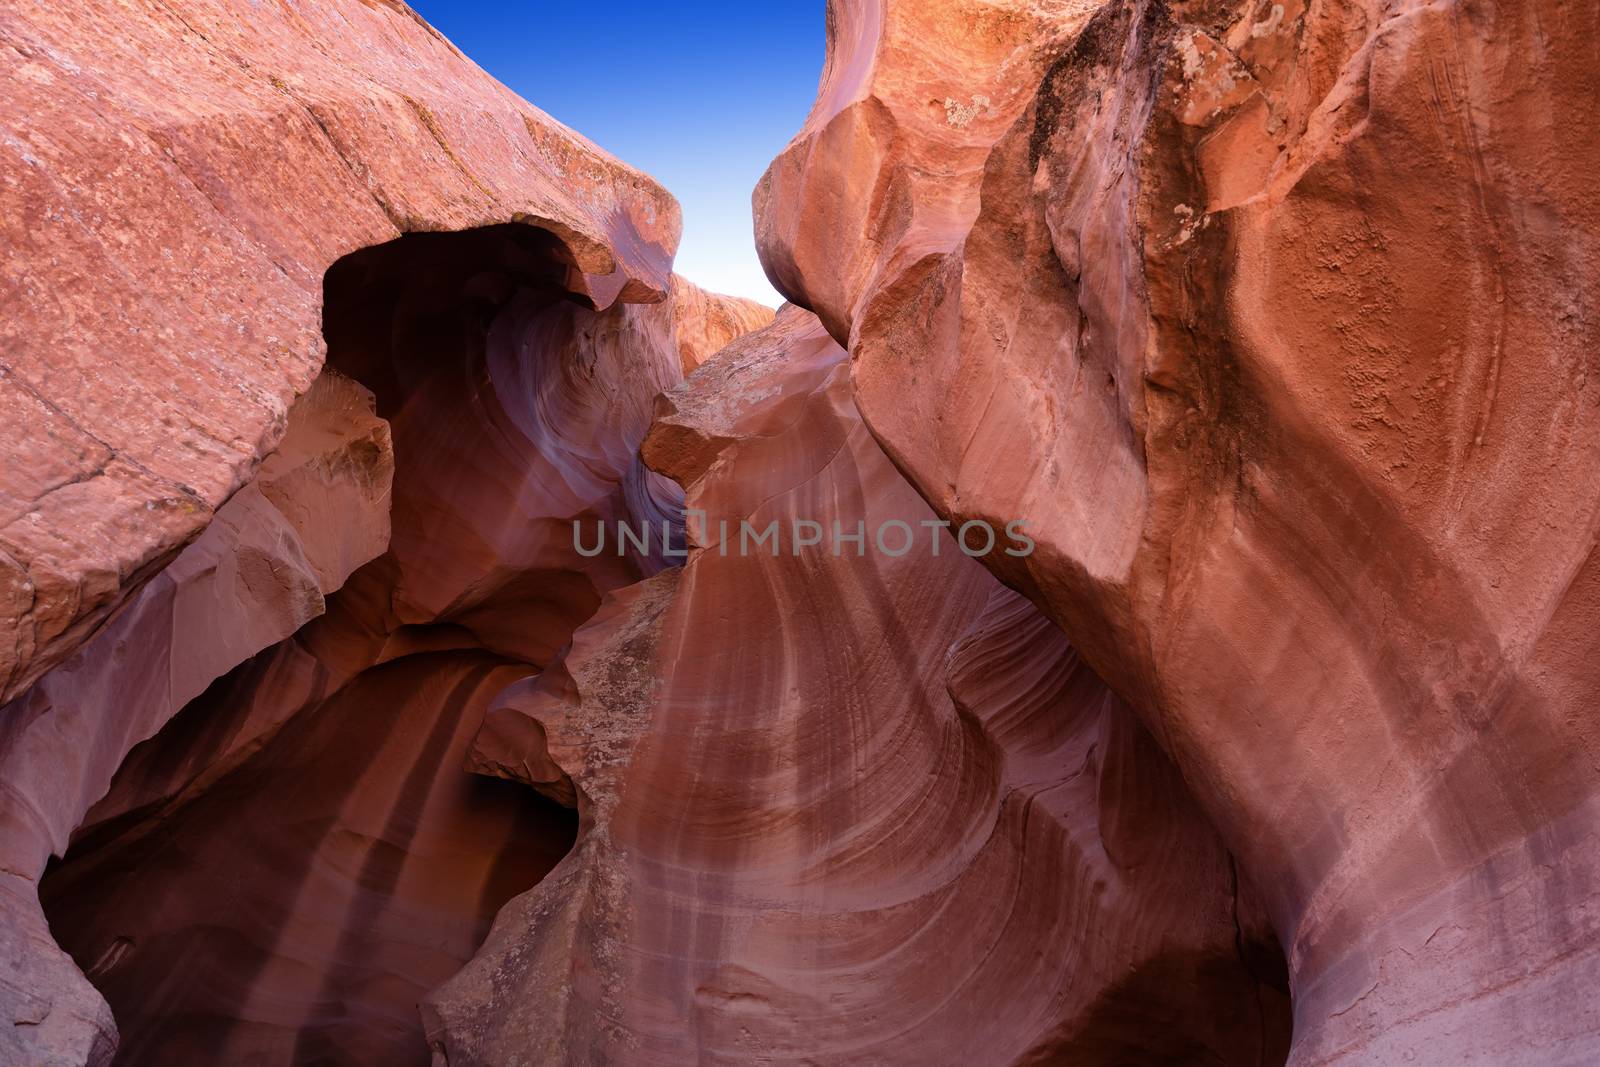 Upward view of Antelope Canyon in Arizona with blue sky